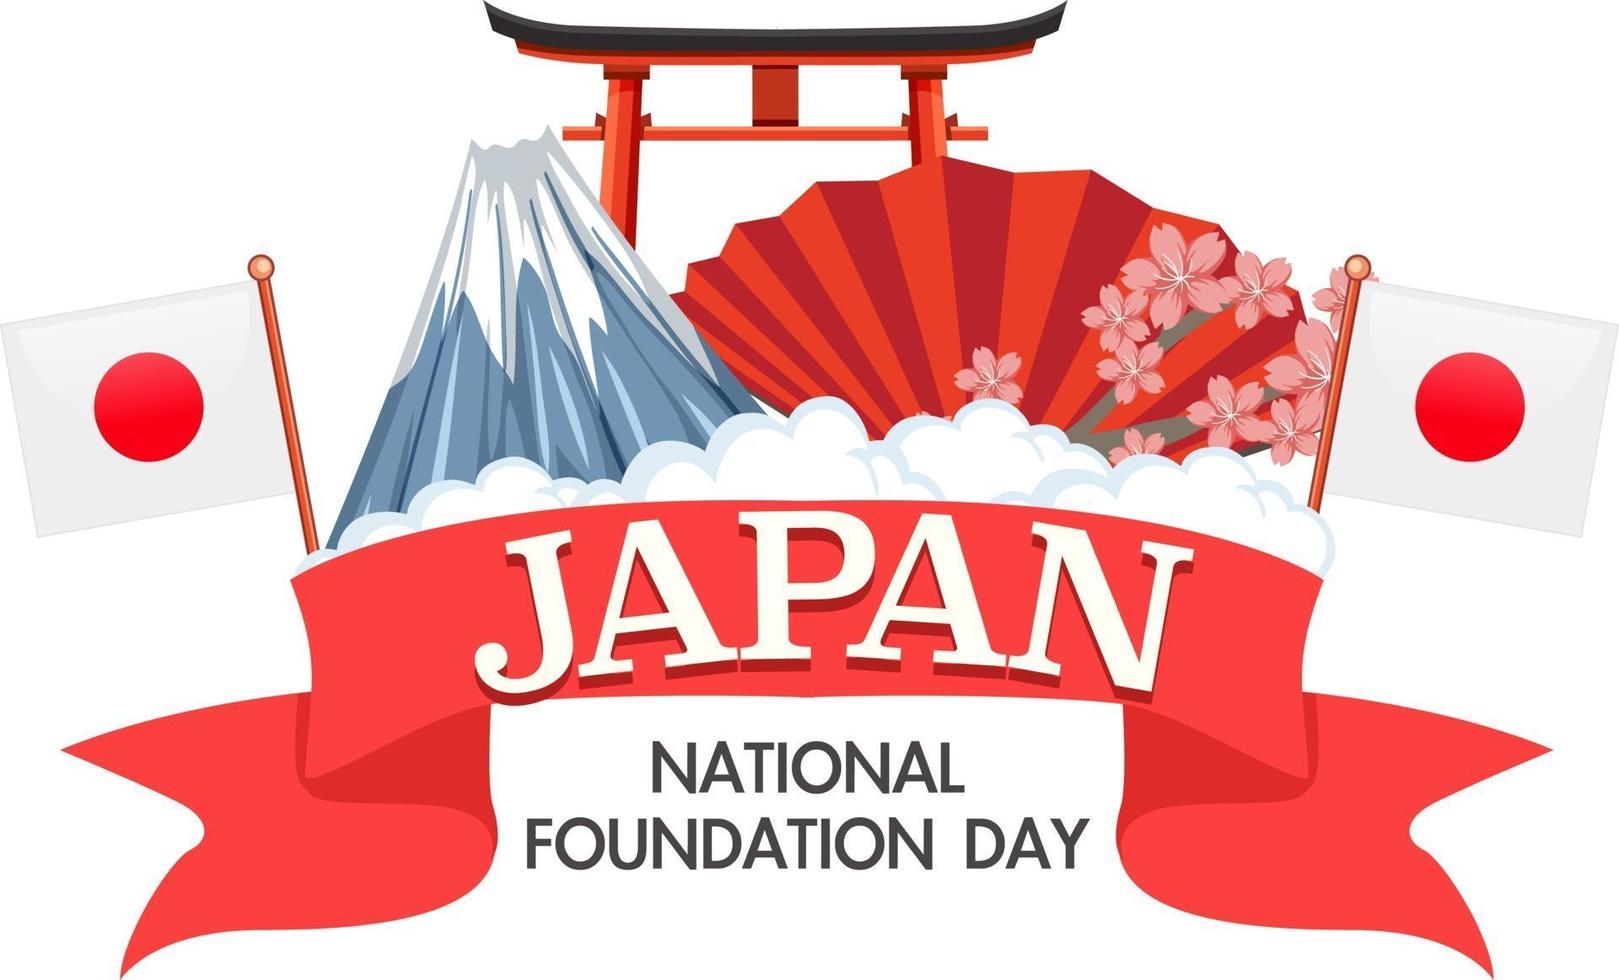 Japan National Foundation Day banner with Mount Fuji and Torii gate vector